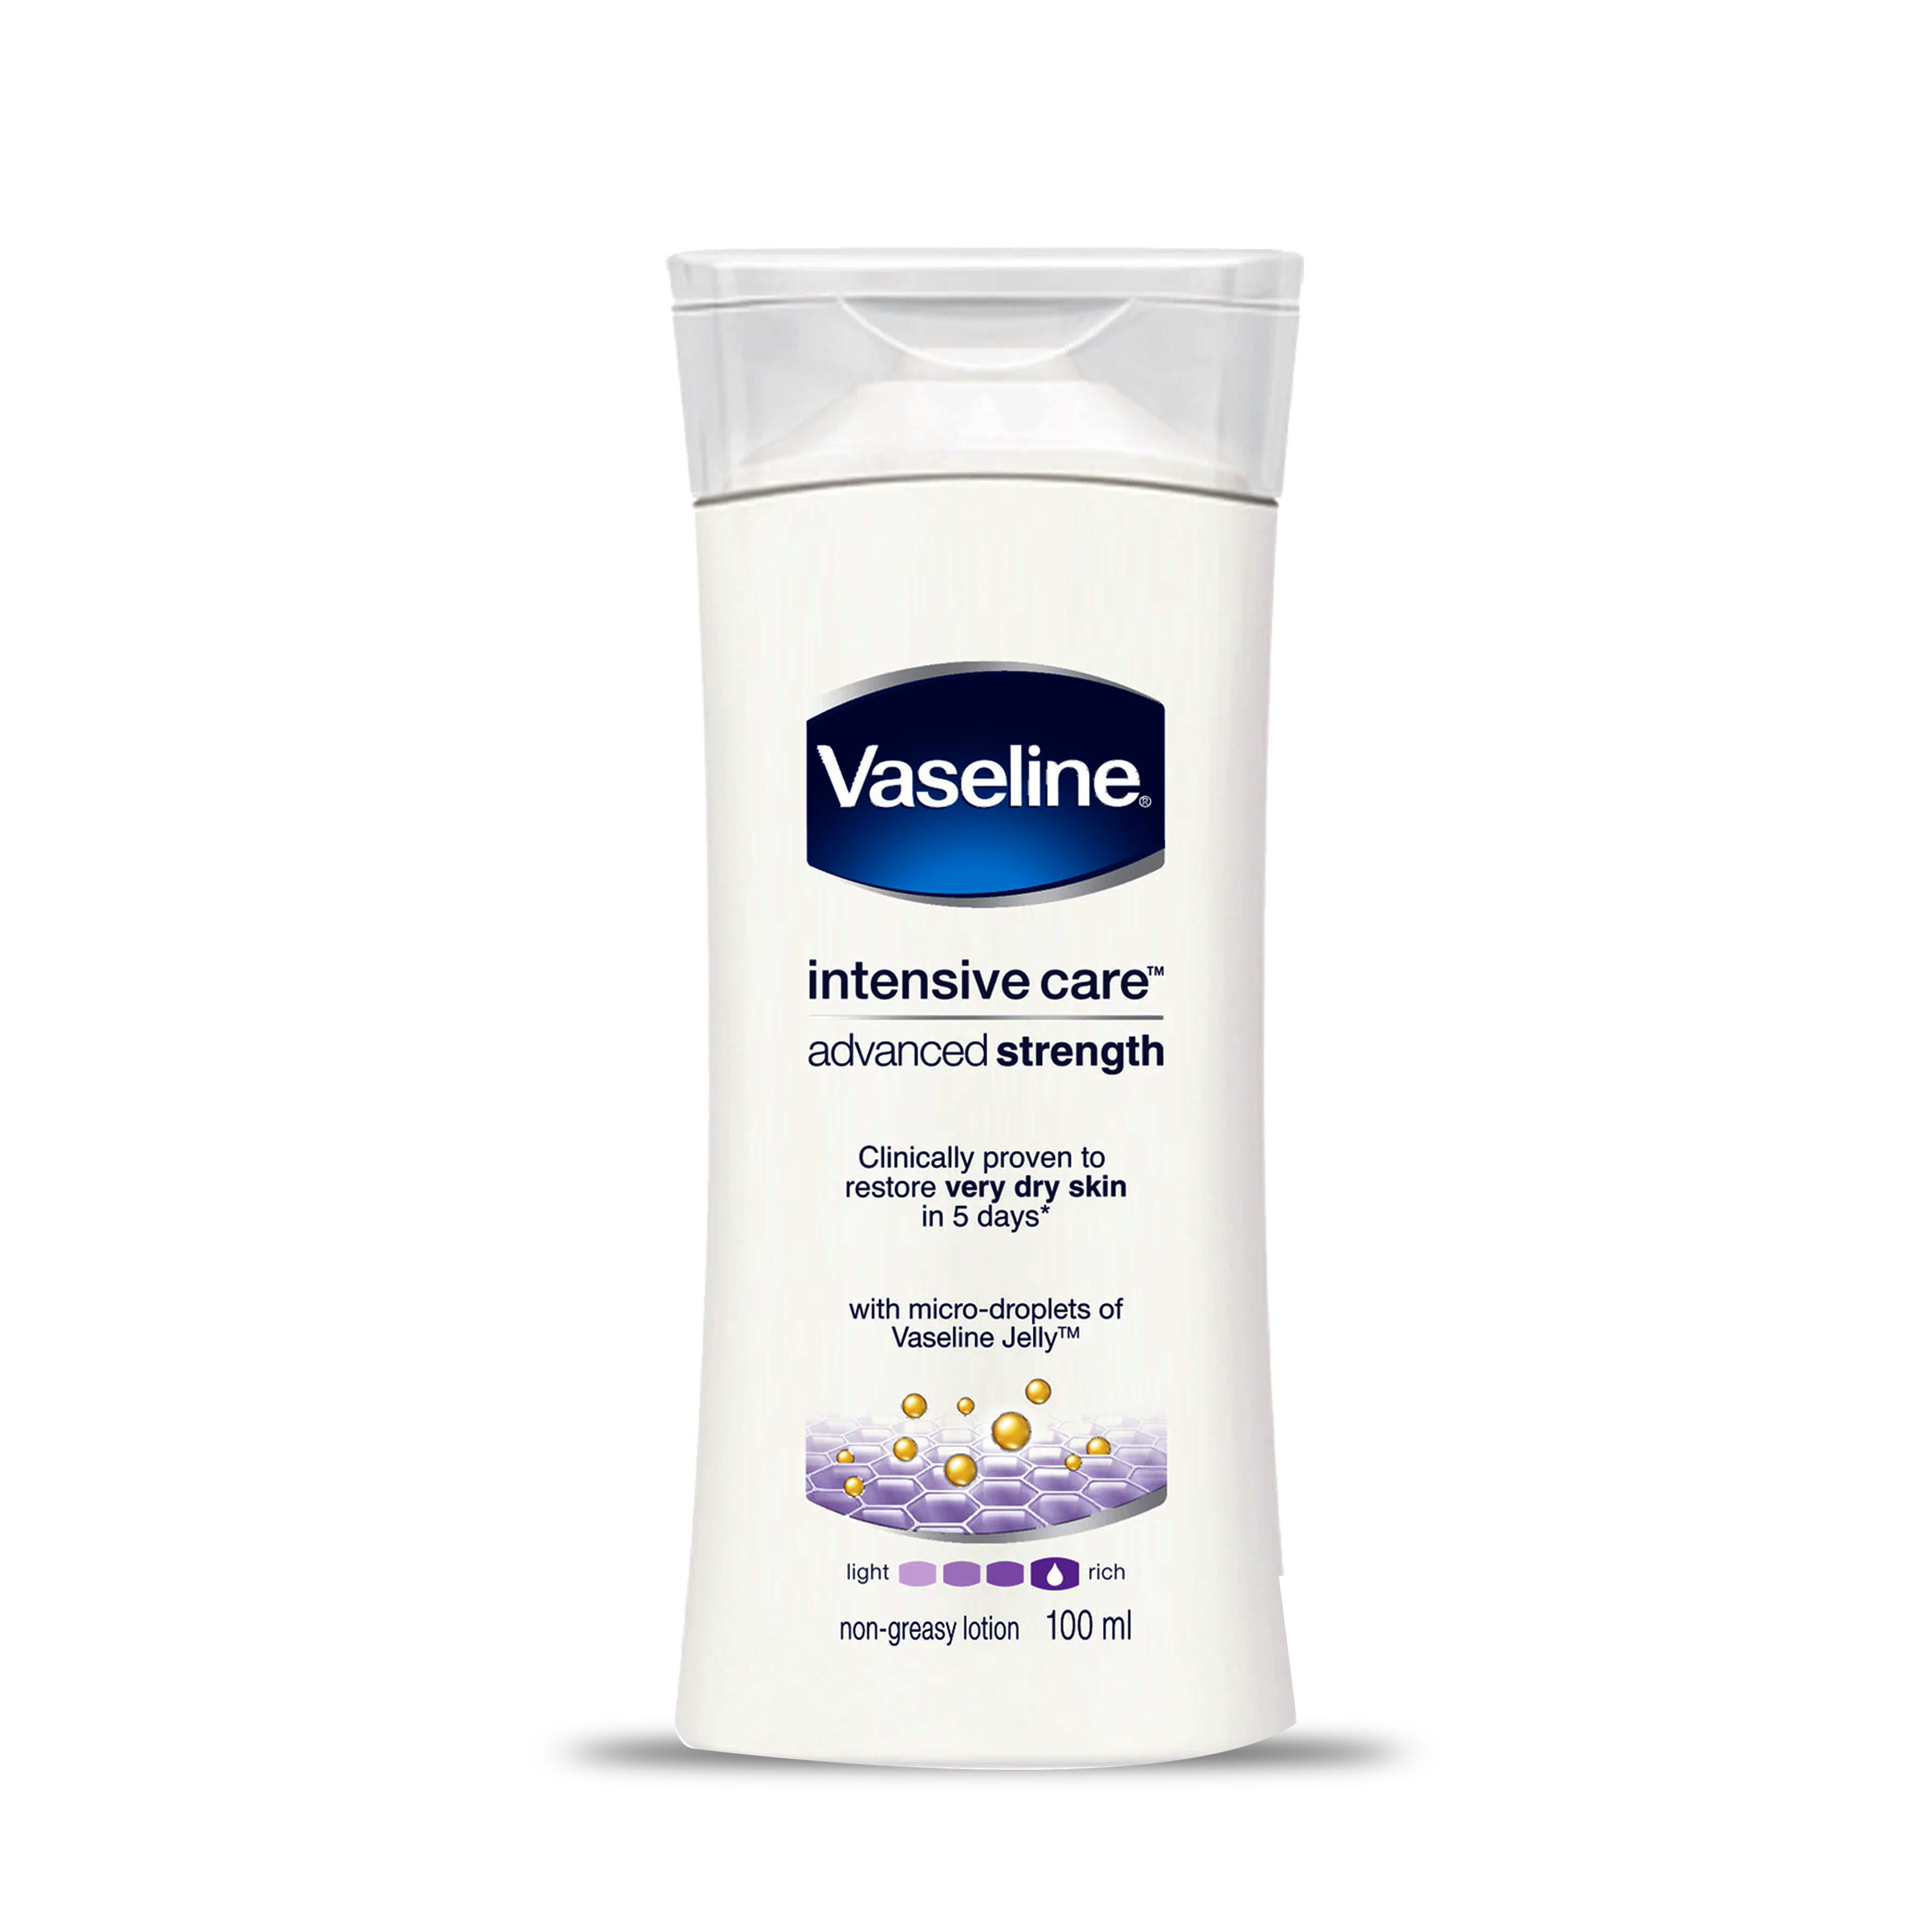 Vaseline Body Lotion Intensive Care Advance Strength 100ml / 200 ml- Losion Tubuh